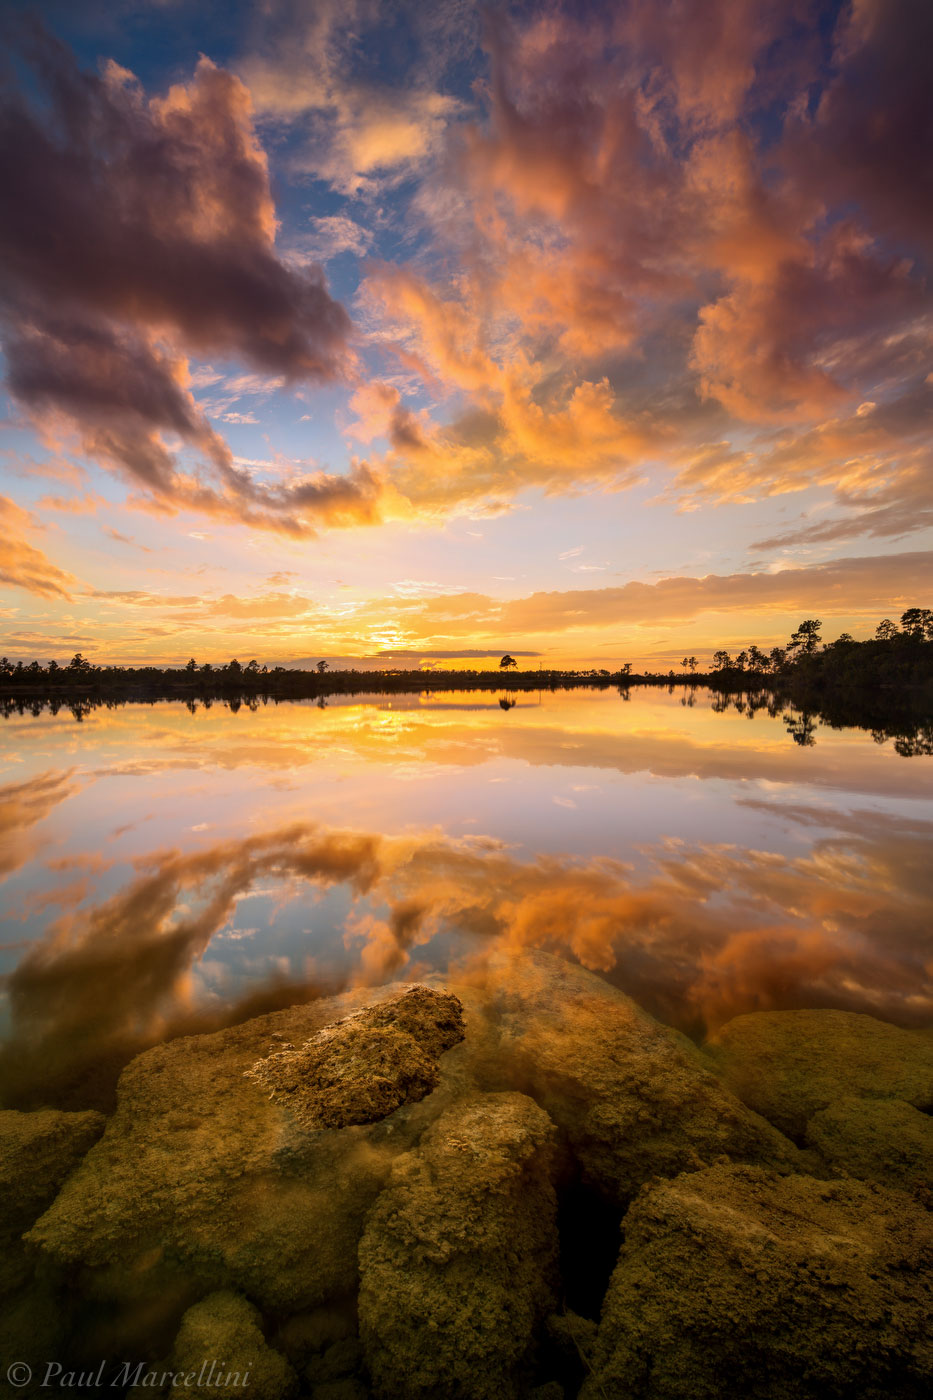 A vibrant sunset reflected in a favorite lake of the Everglades.